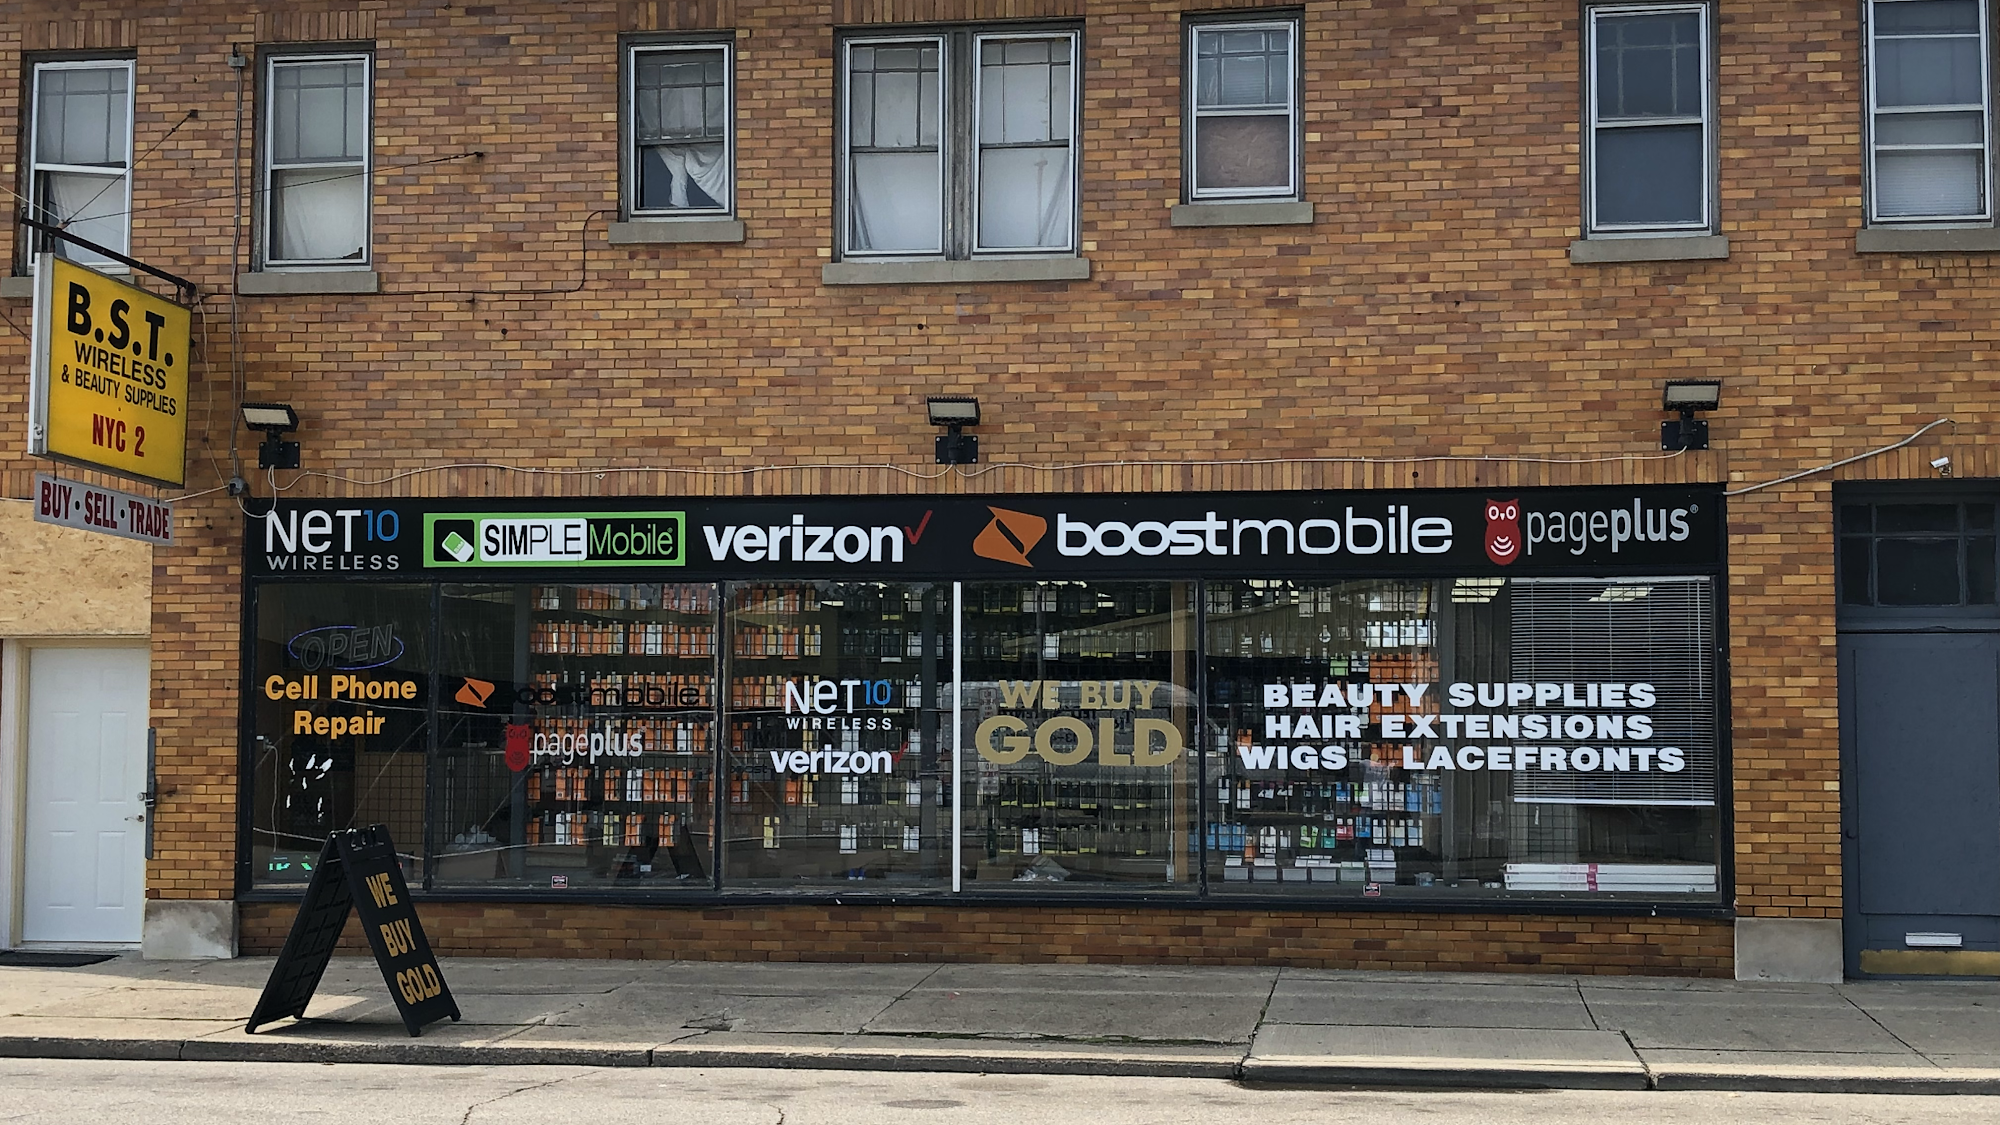 BOOST MOBILE By BST Wireless & Beauty supply ( NYC2 )